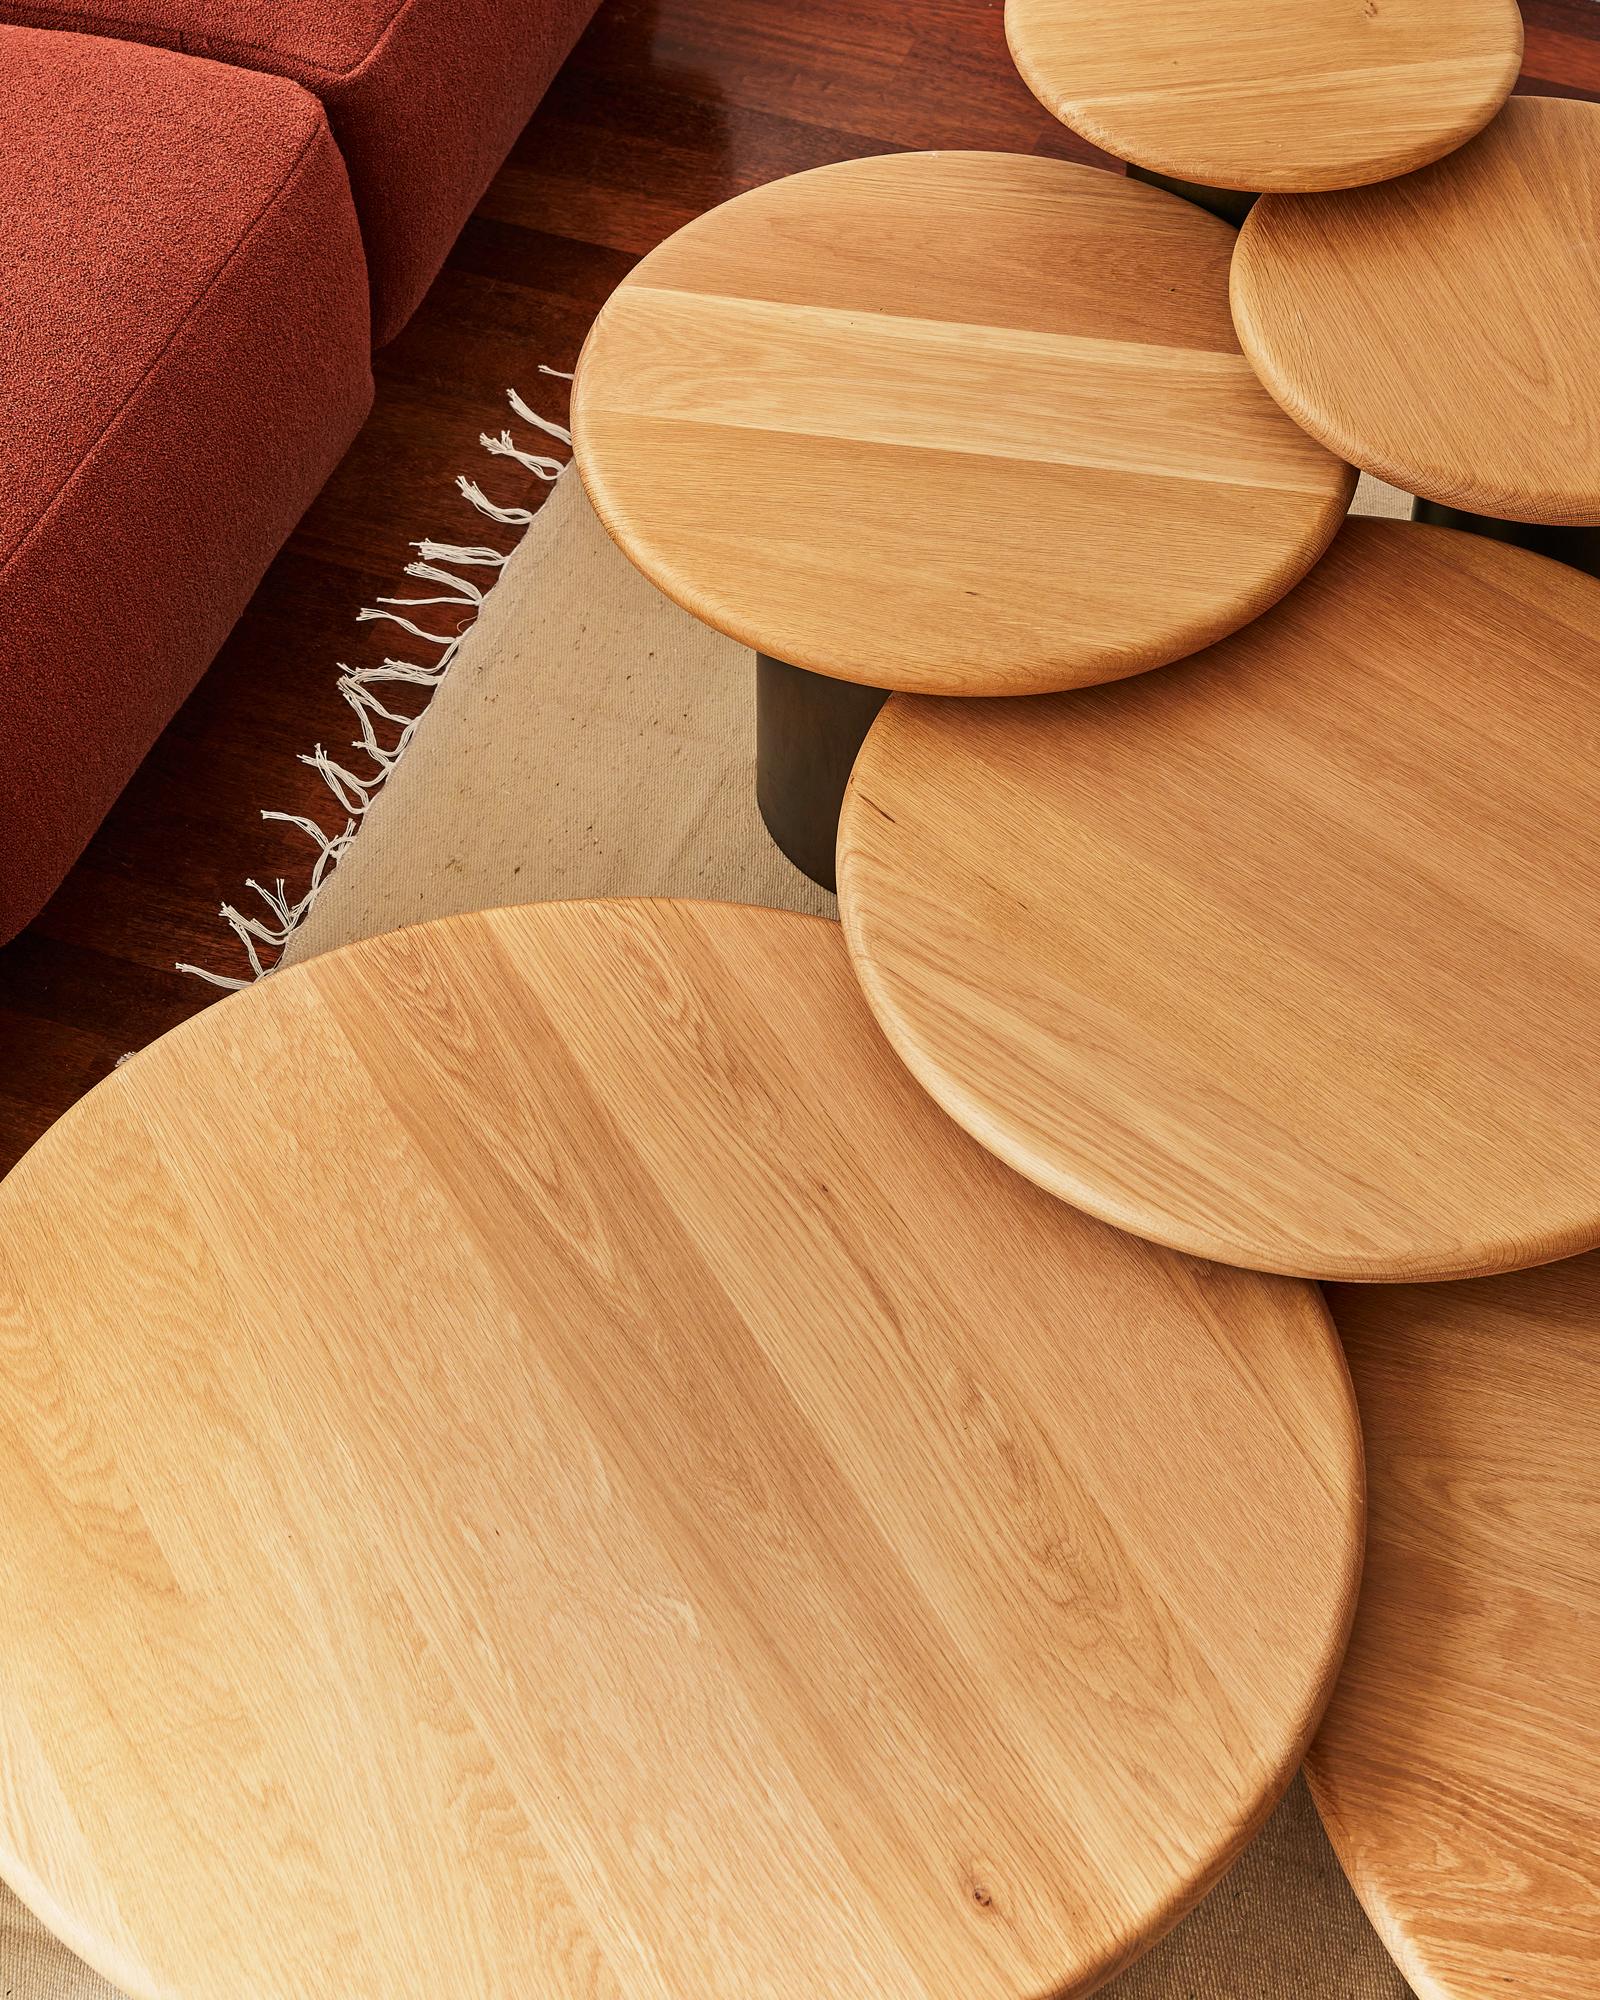 Raindrop Coffee Table Set, 600, 800, 1000, White Oak / Patinated In New Condition For Sale In London, England